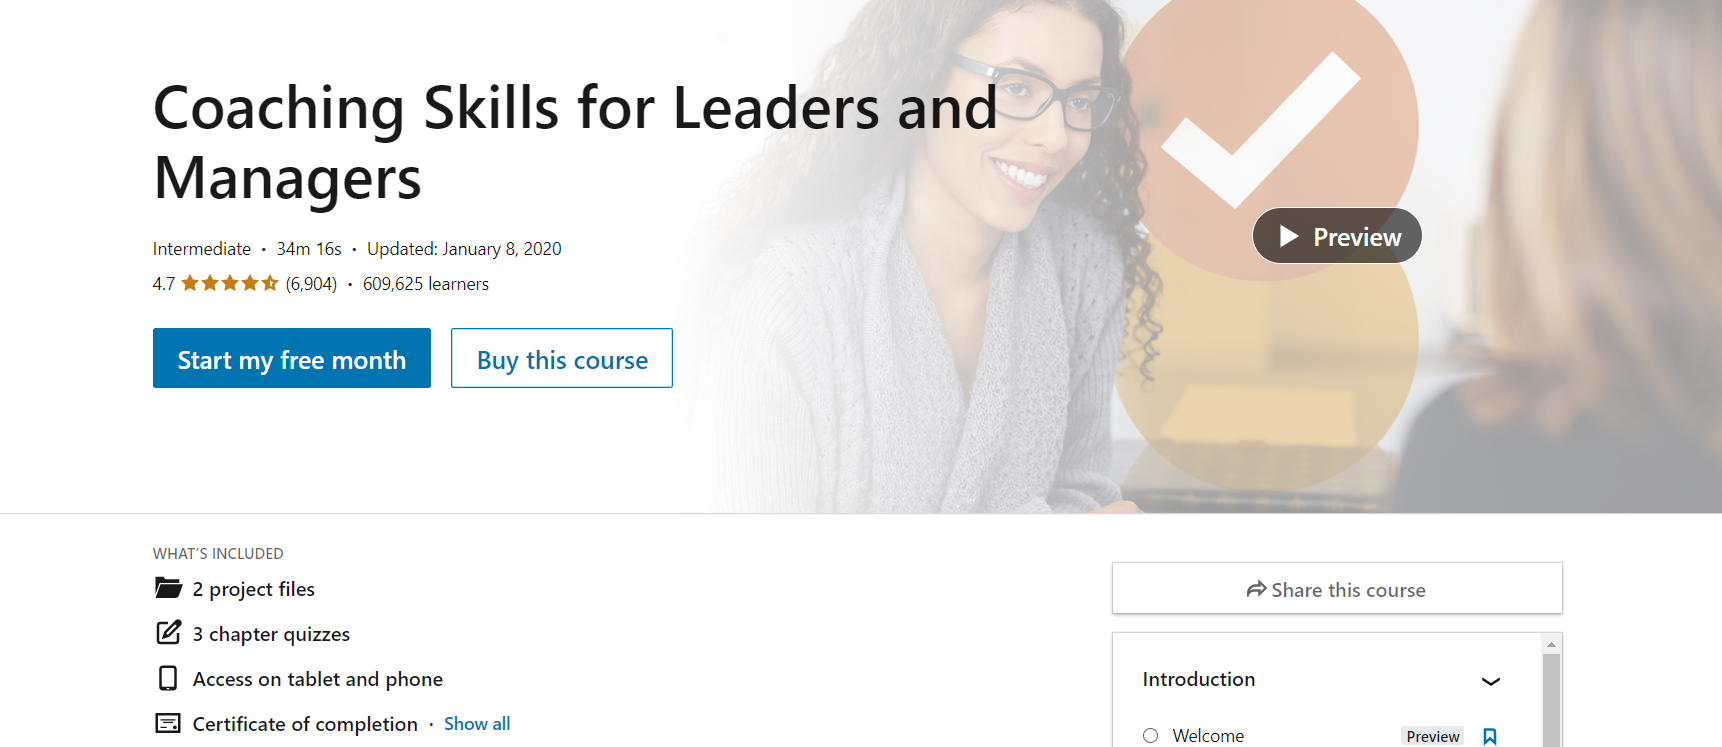 LinkedIn Learning: Coaching Skills for Leaders and Managers course